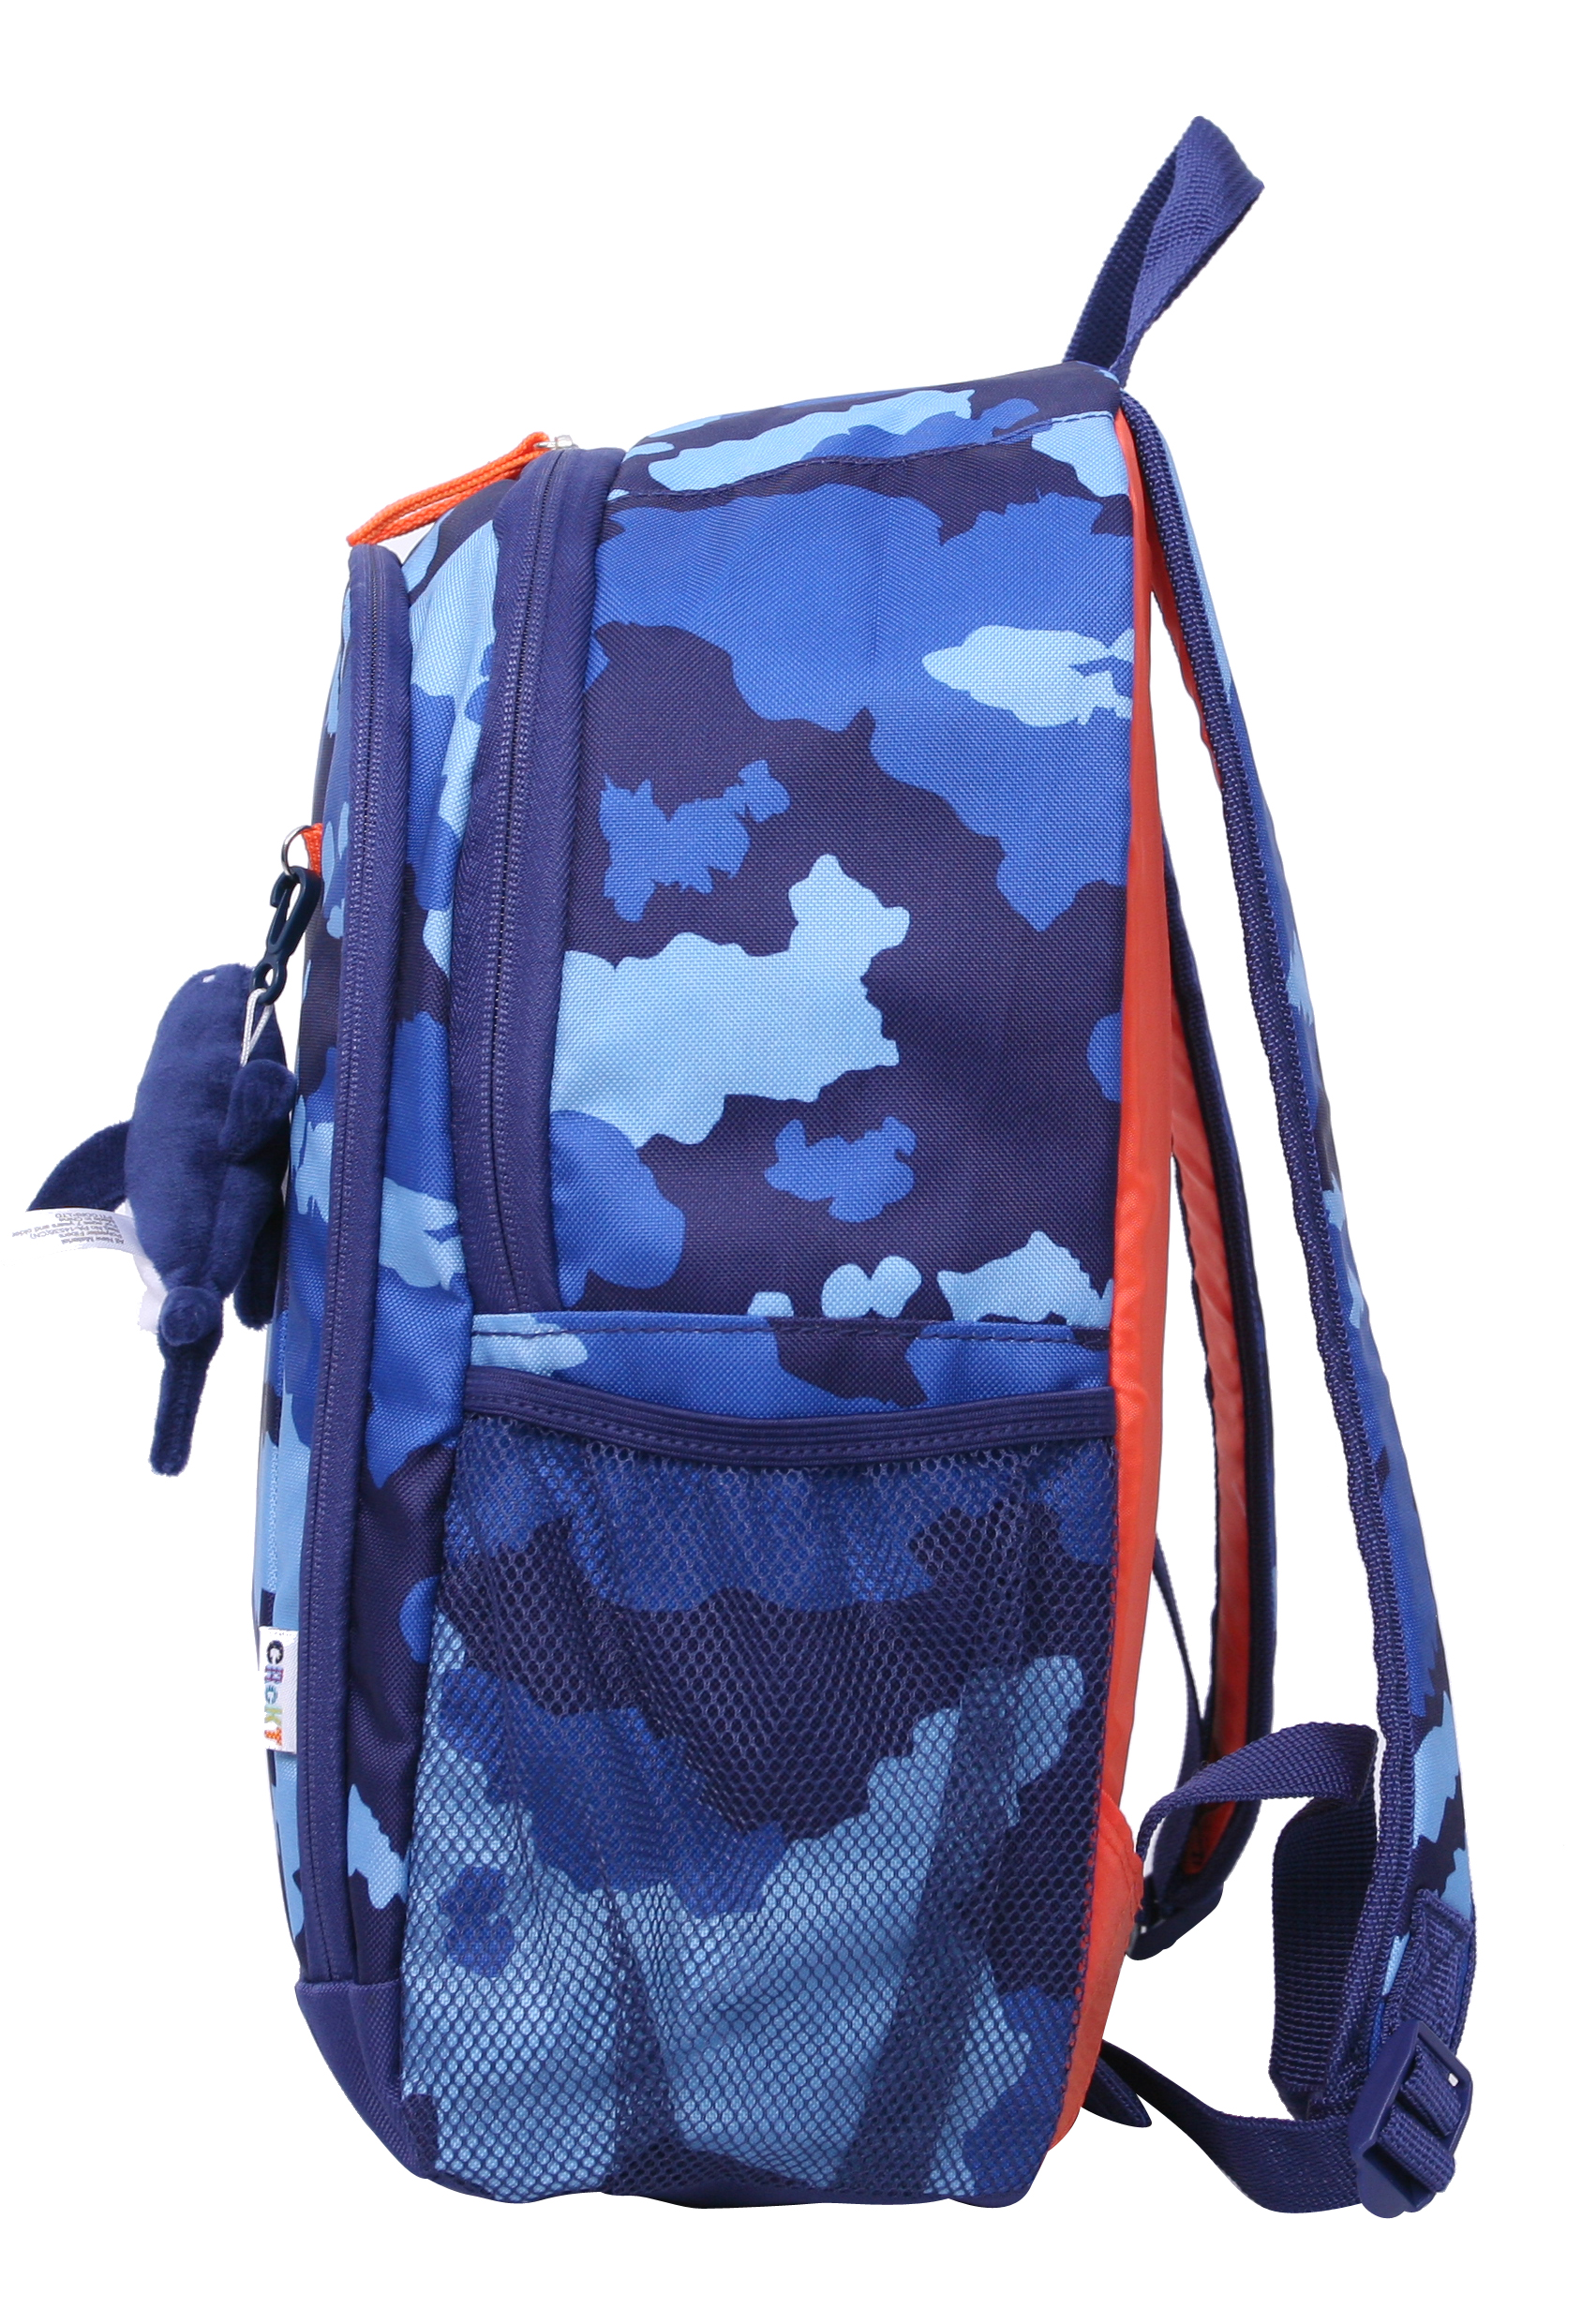 Crckt Kids Boys 15" School Backpack with Plush Dangle, Blue Camo Print - image 2 of 8